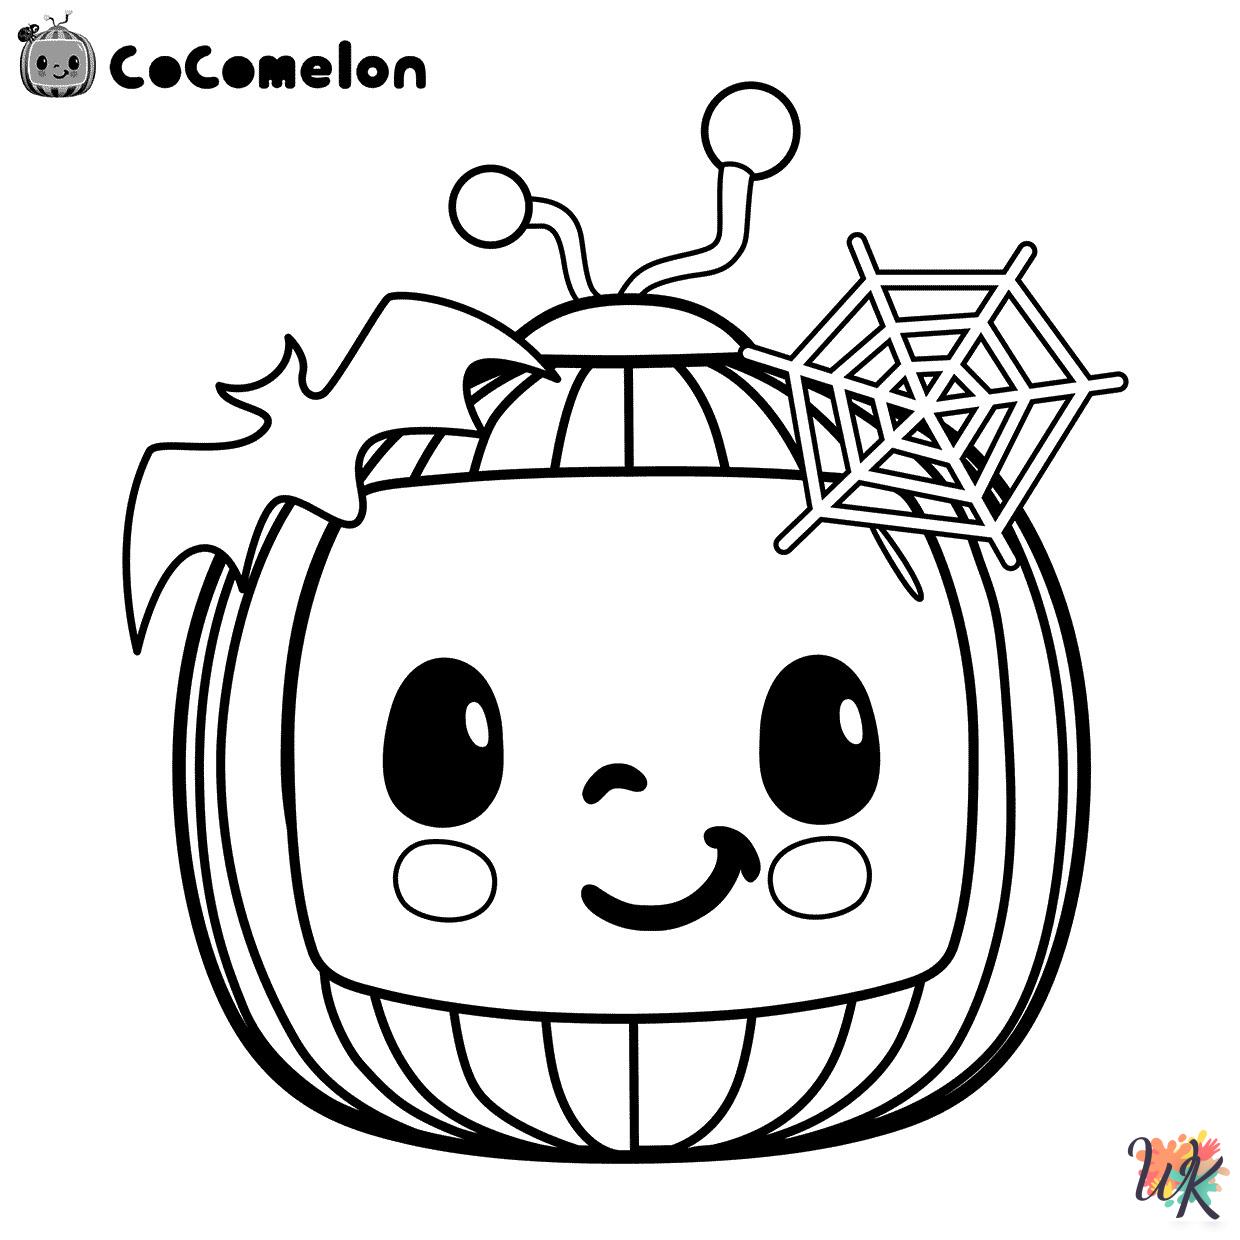 Cocomelon coloring pages for adults pdf